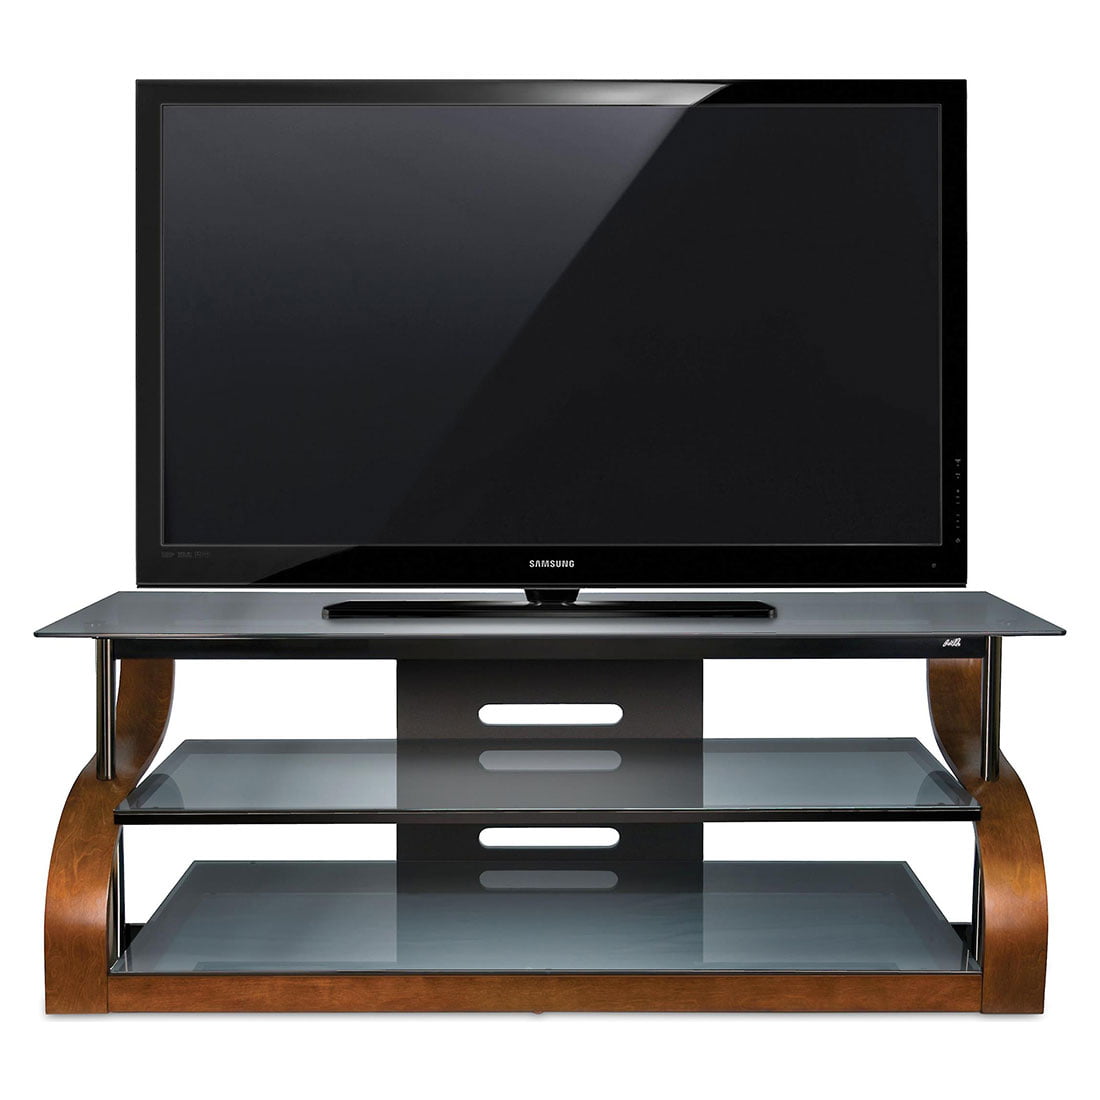 Bell'O CW-342 Curved Wood A/V Furniture in Vibrant Espresso Finish